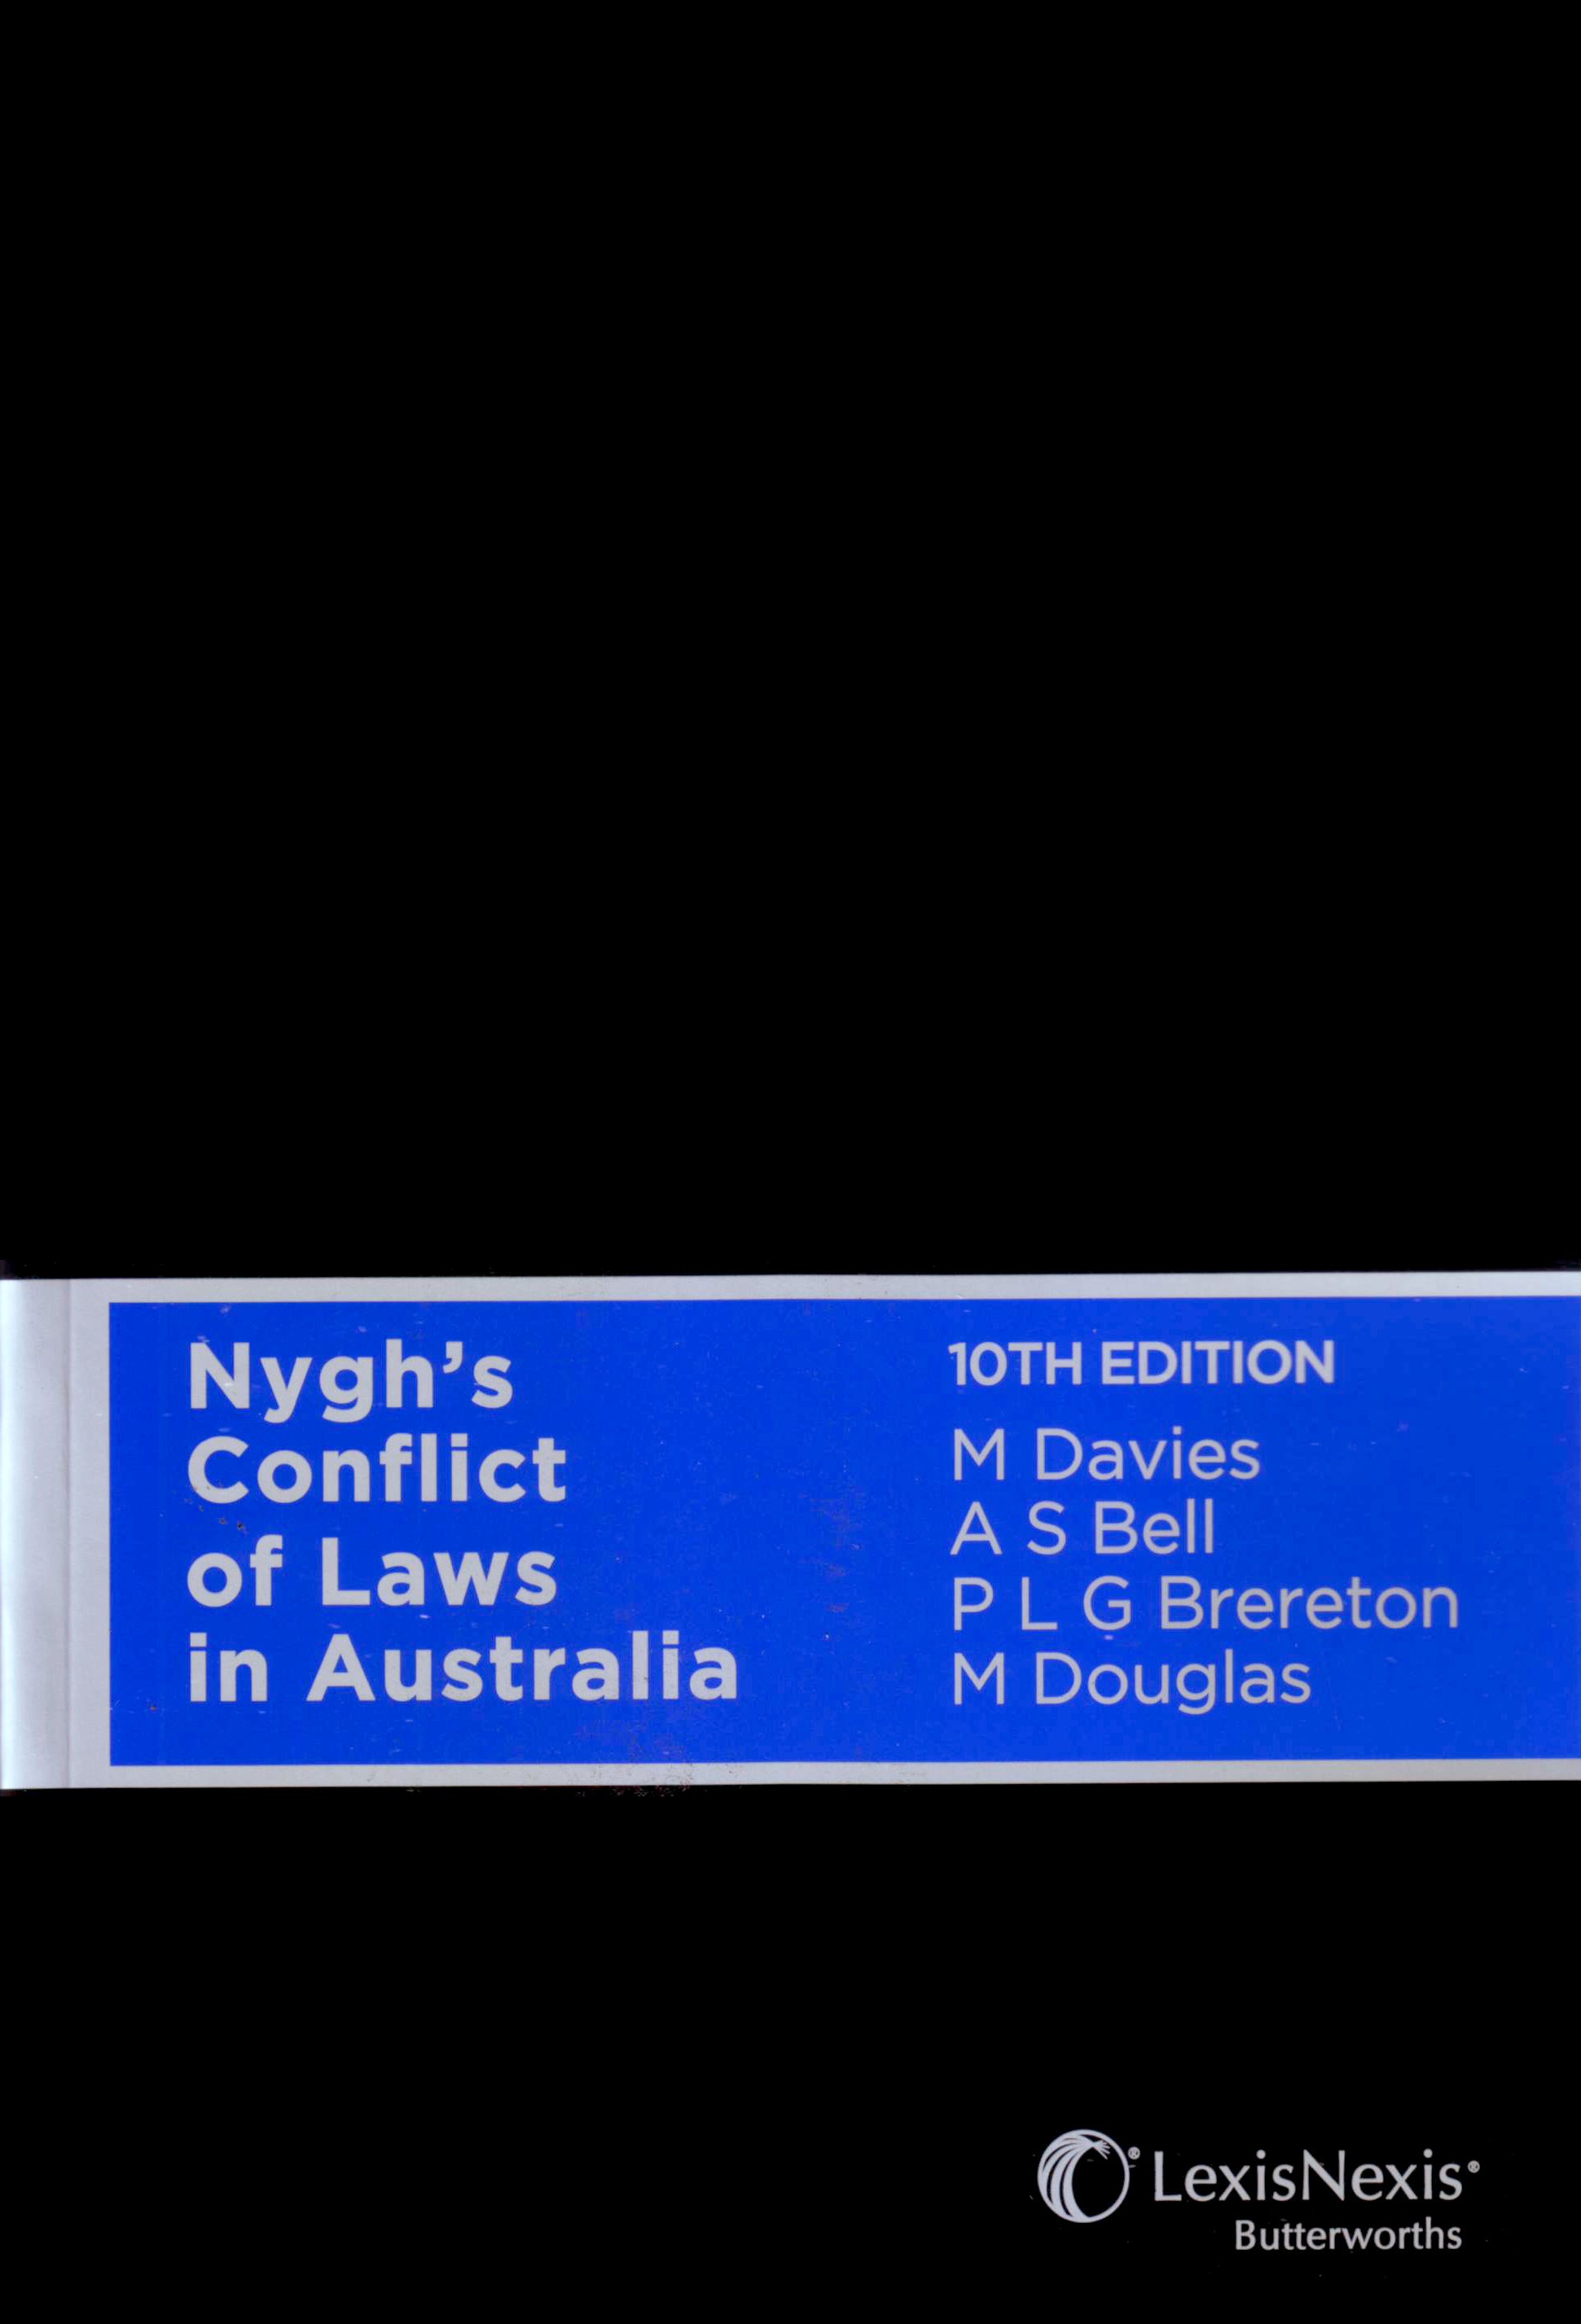 Nygh’s Conflict of Laws in Australia e10 (Hardcover)